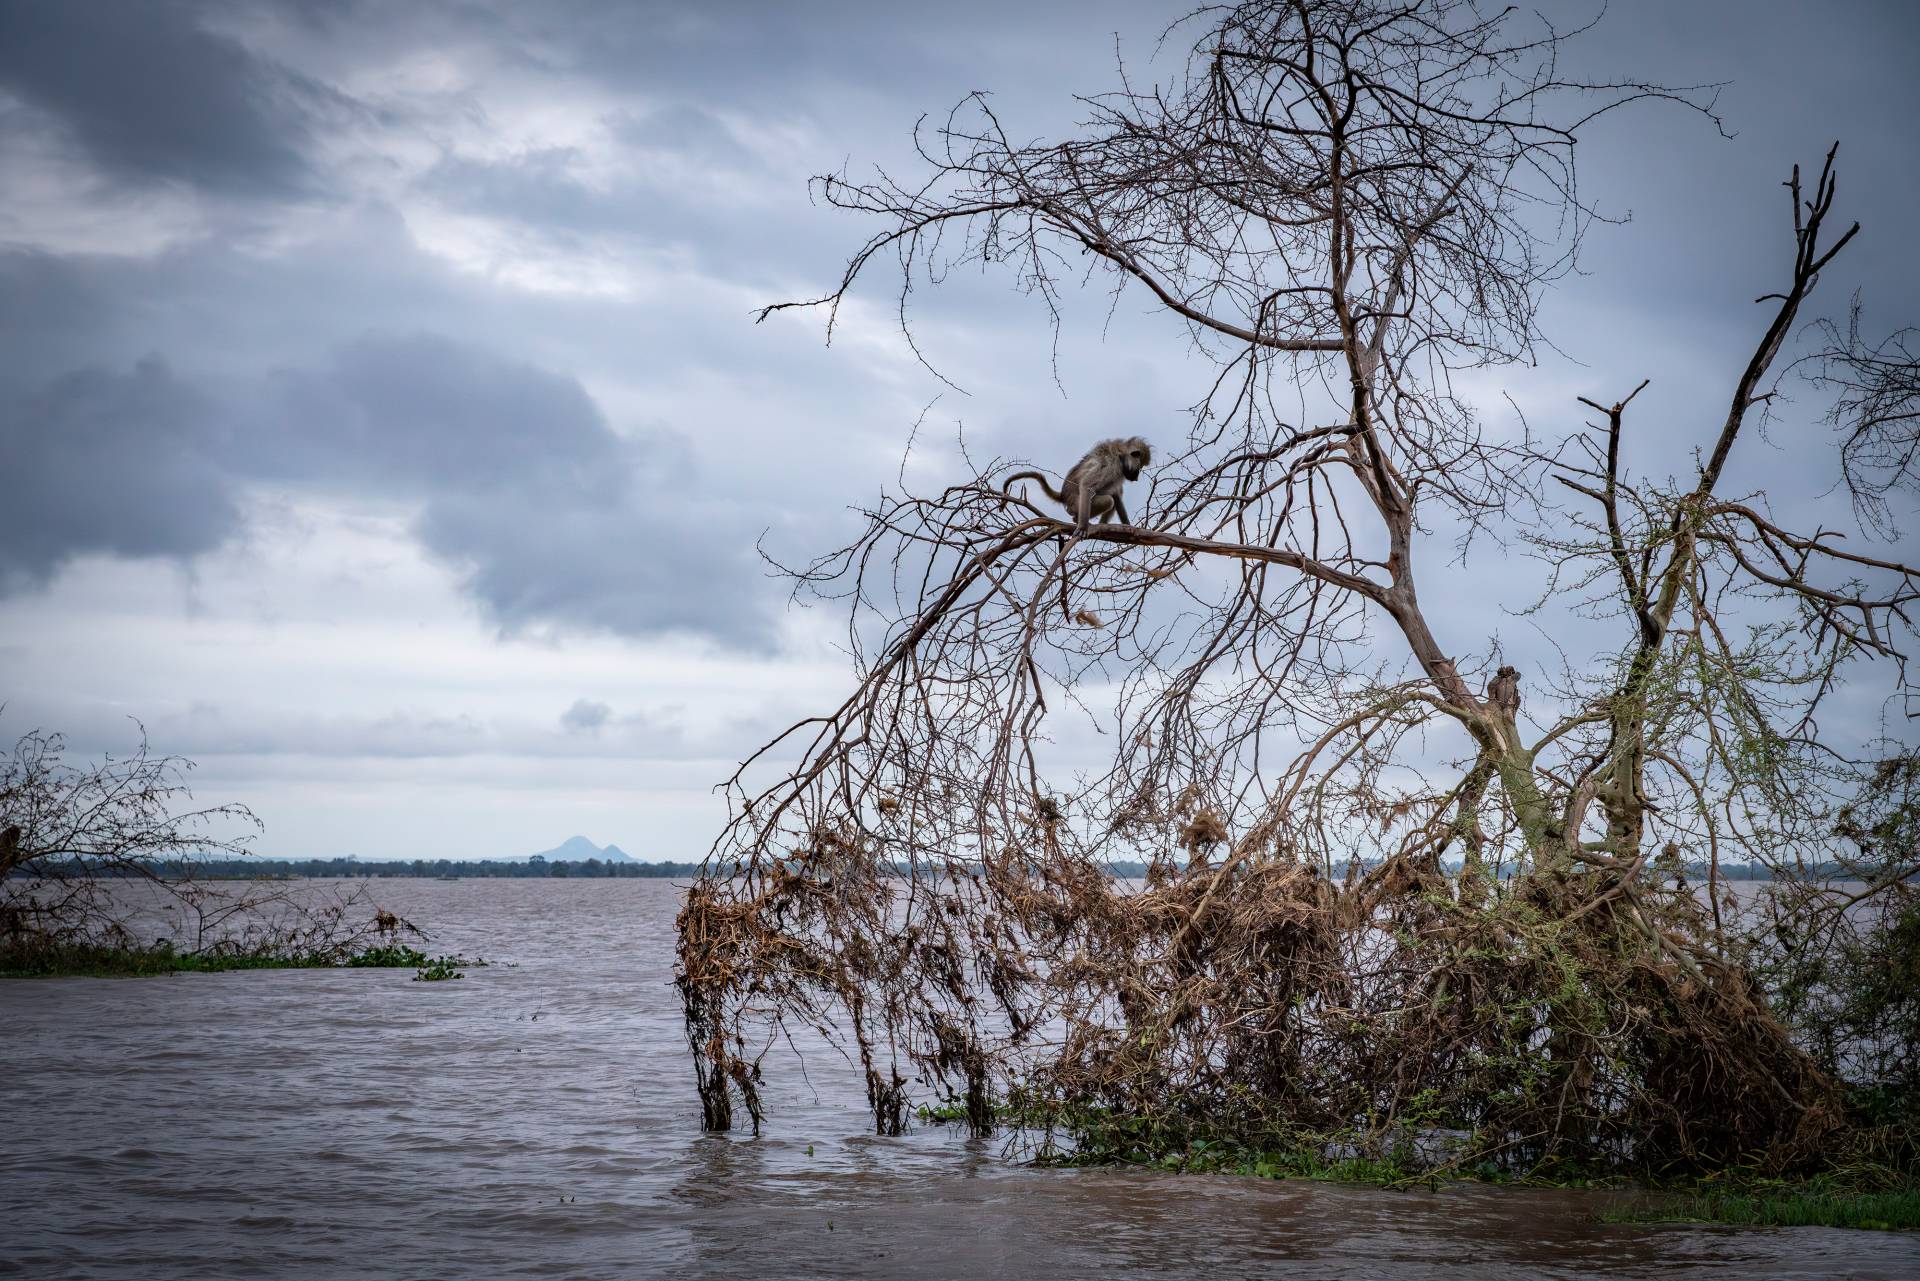 A very thin baboon was still stranded in a tree on the Gorongosa National Park floodplain almost a month after the cyclone. It seemed to have been surviving off of leaves stripped from this tree, an insufficient diet for the omnivorous primate. 